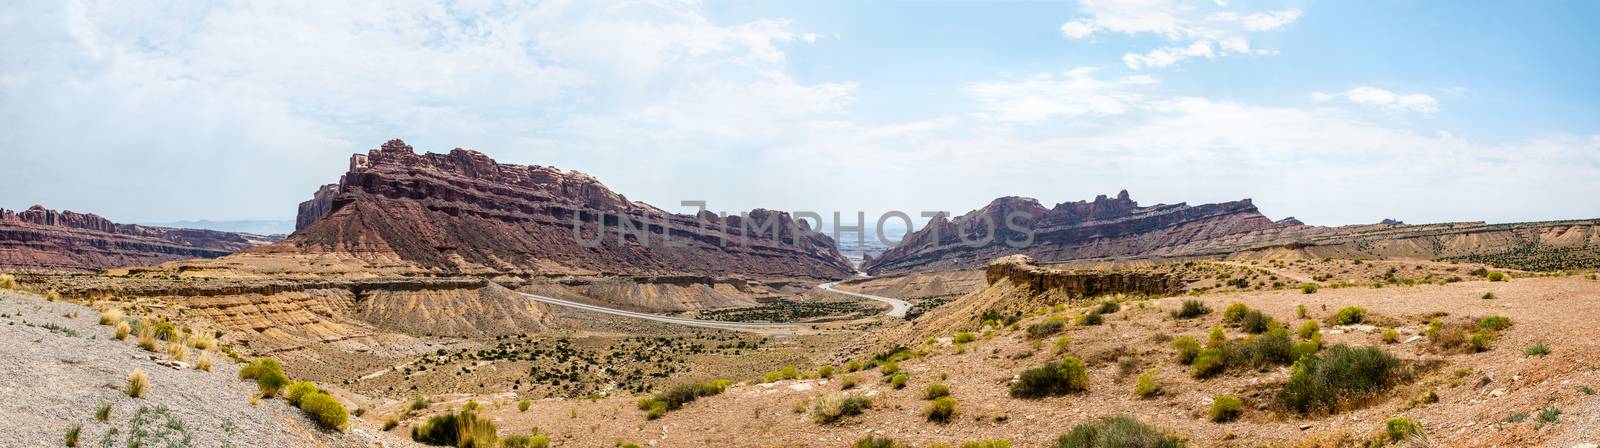 Panorama looking out onto Spotted Wolf Canyon in the San Rafael Swell, Utah